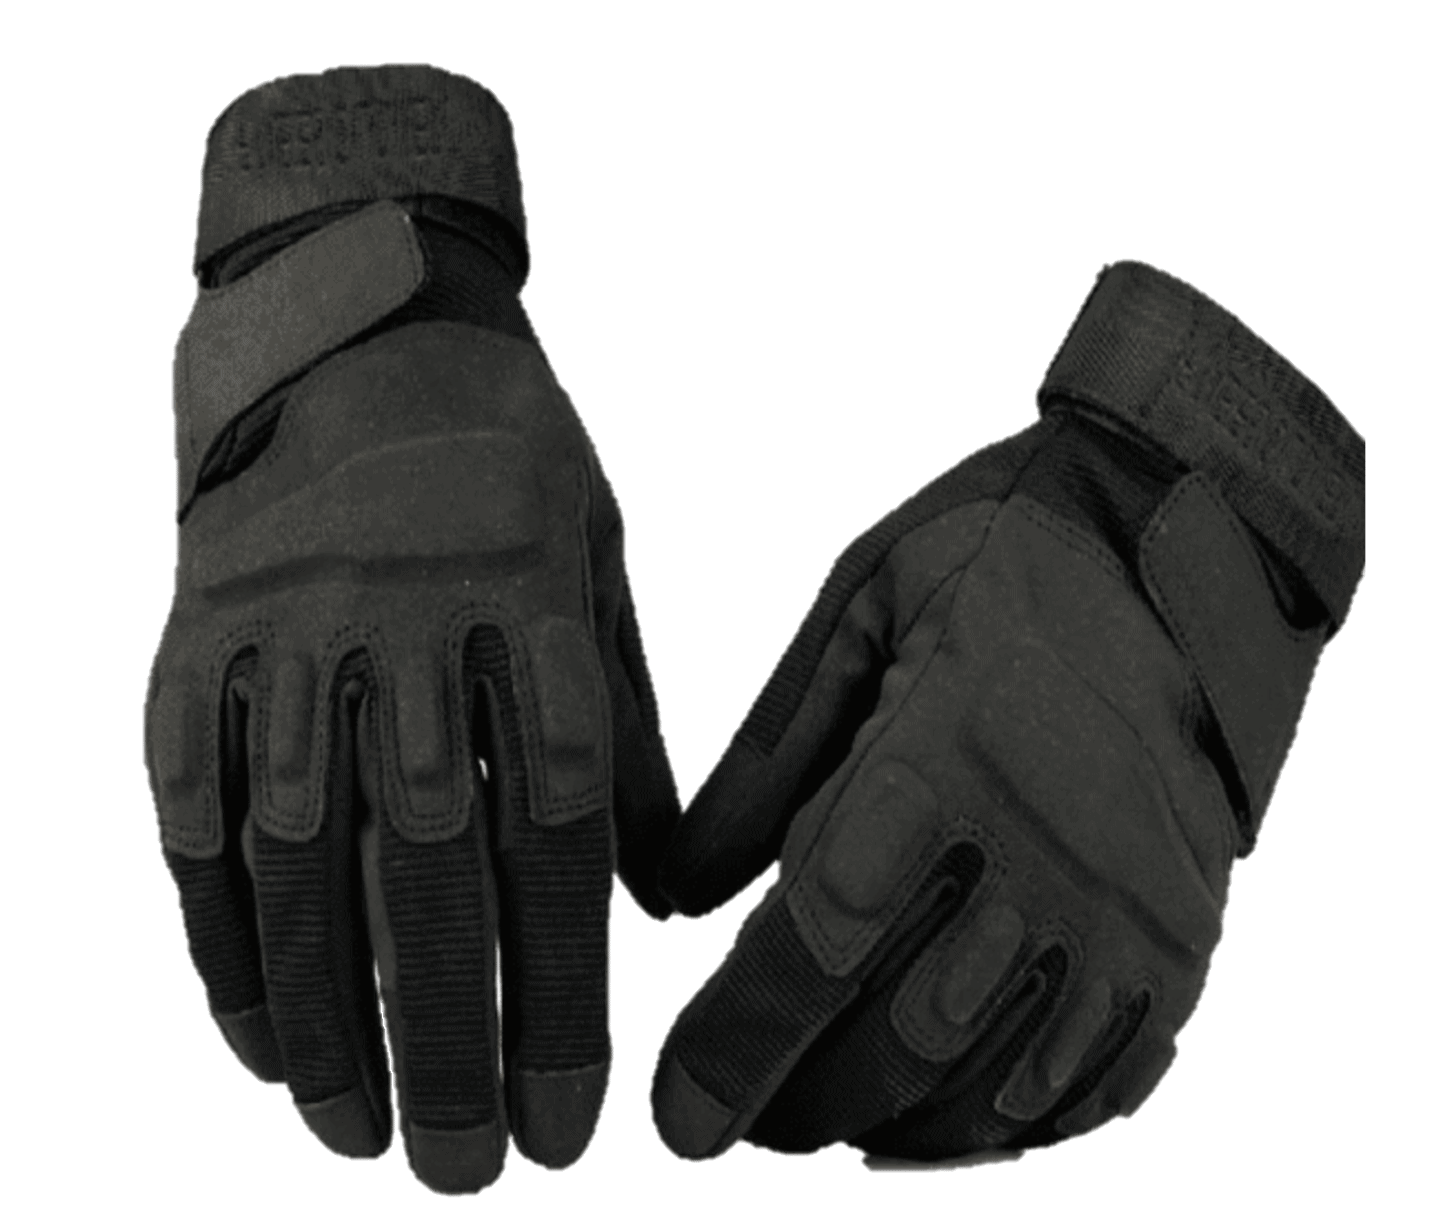 Black Eagle Full Cover Tactical Gloves, PTT Outdoor, Screenshot 2021 04 16 at 1.24.48 PM,